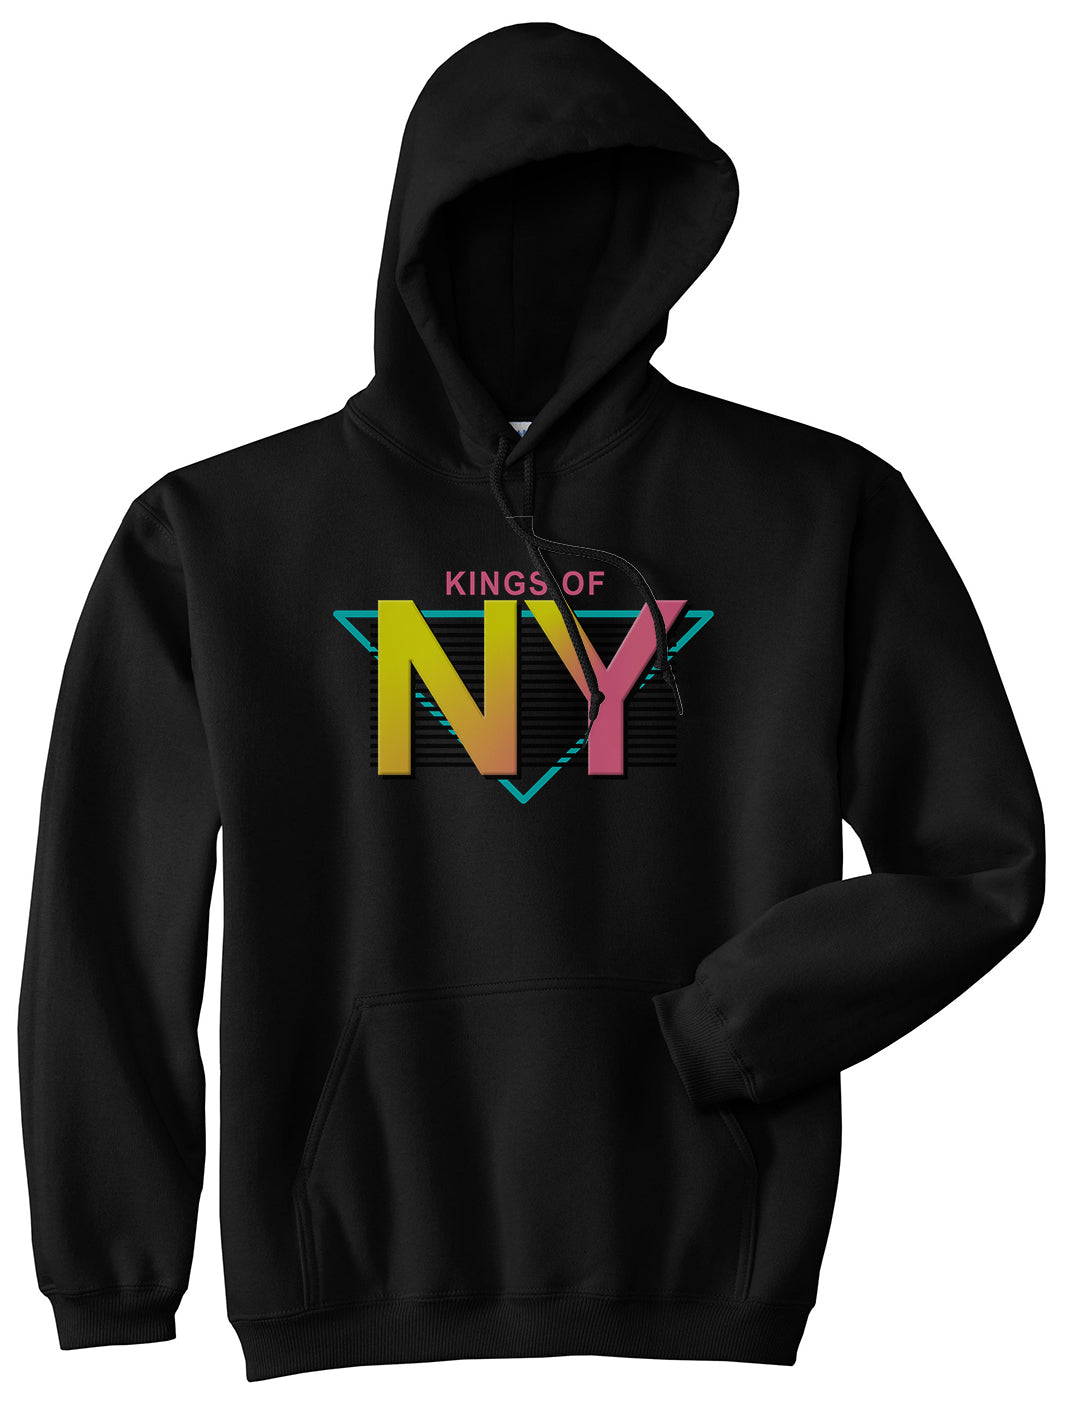 Kings Of NY 80s Retro Mens Pullover Hoodie Black by Kings Of NY